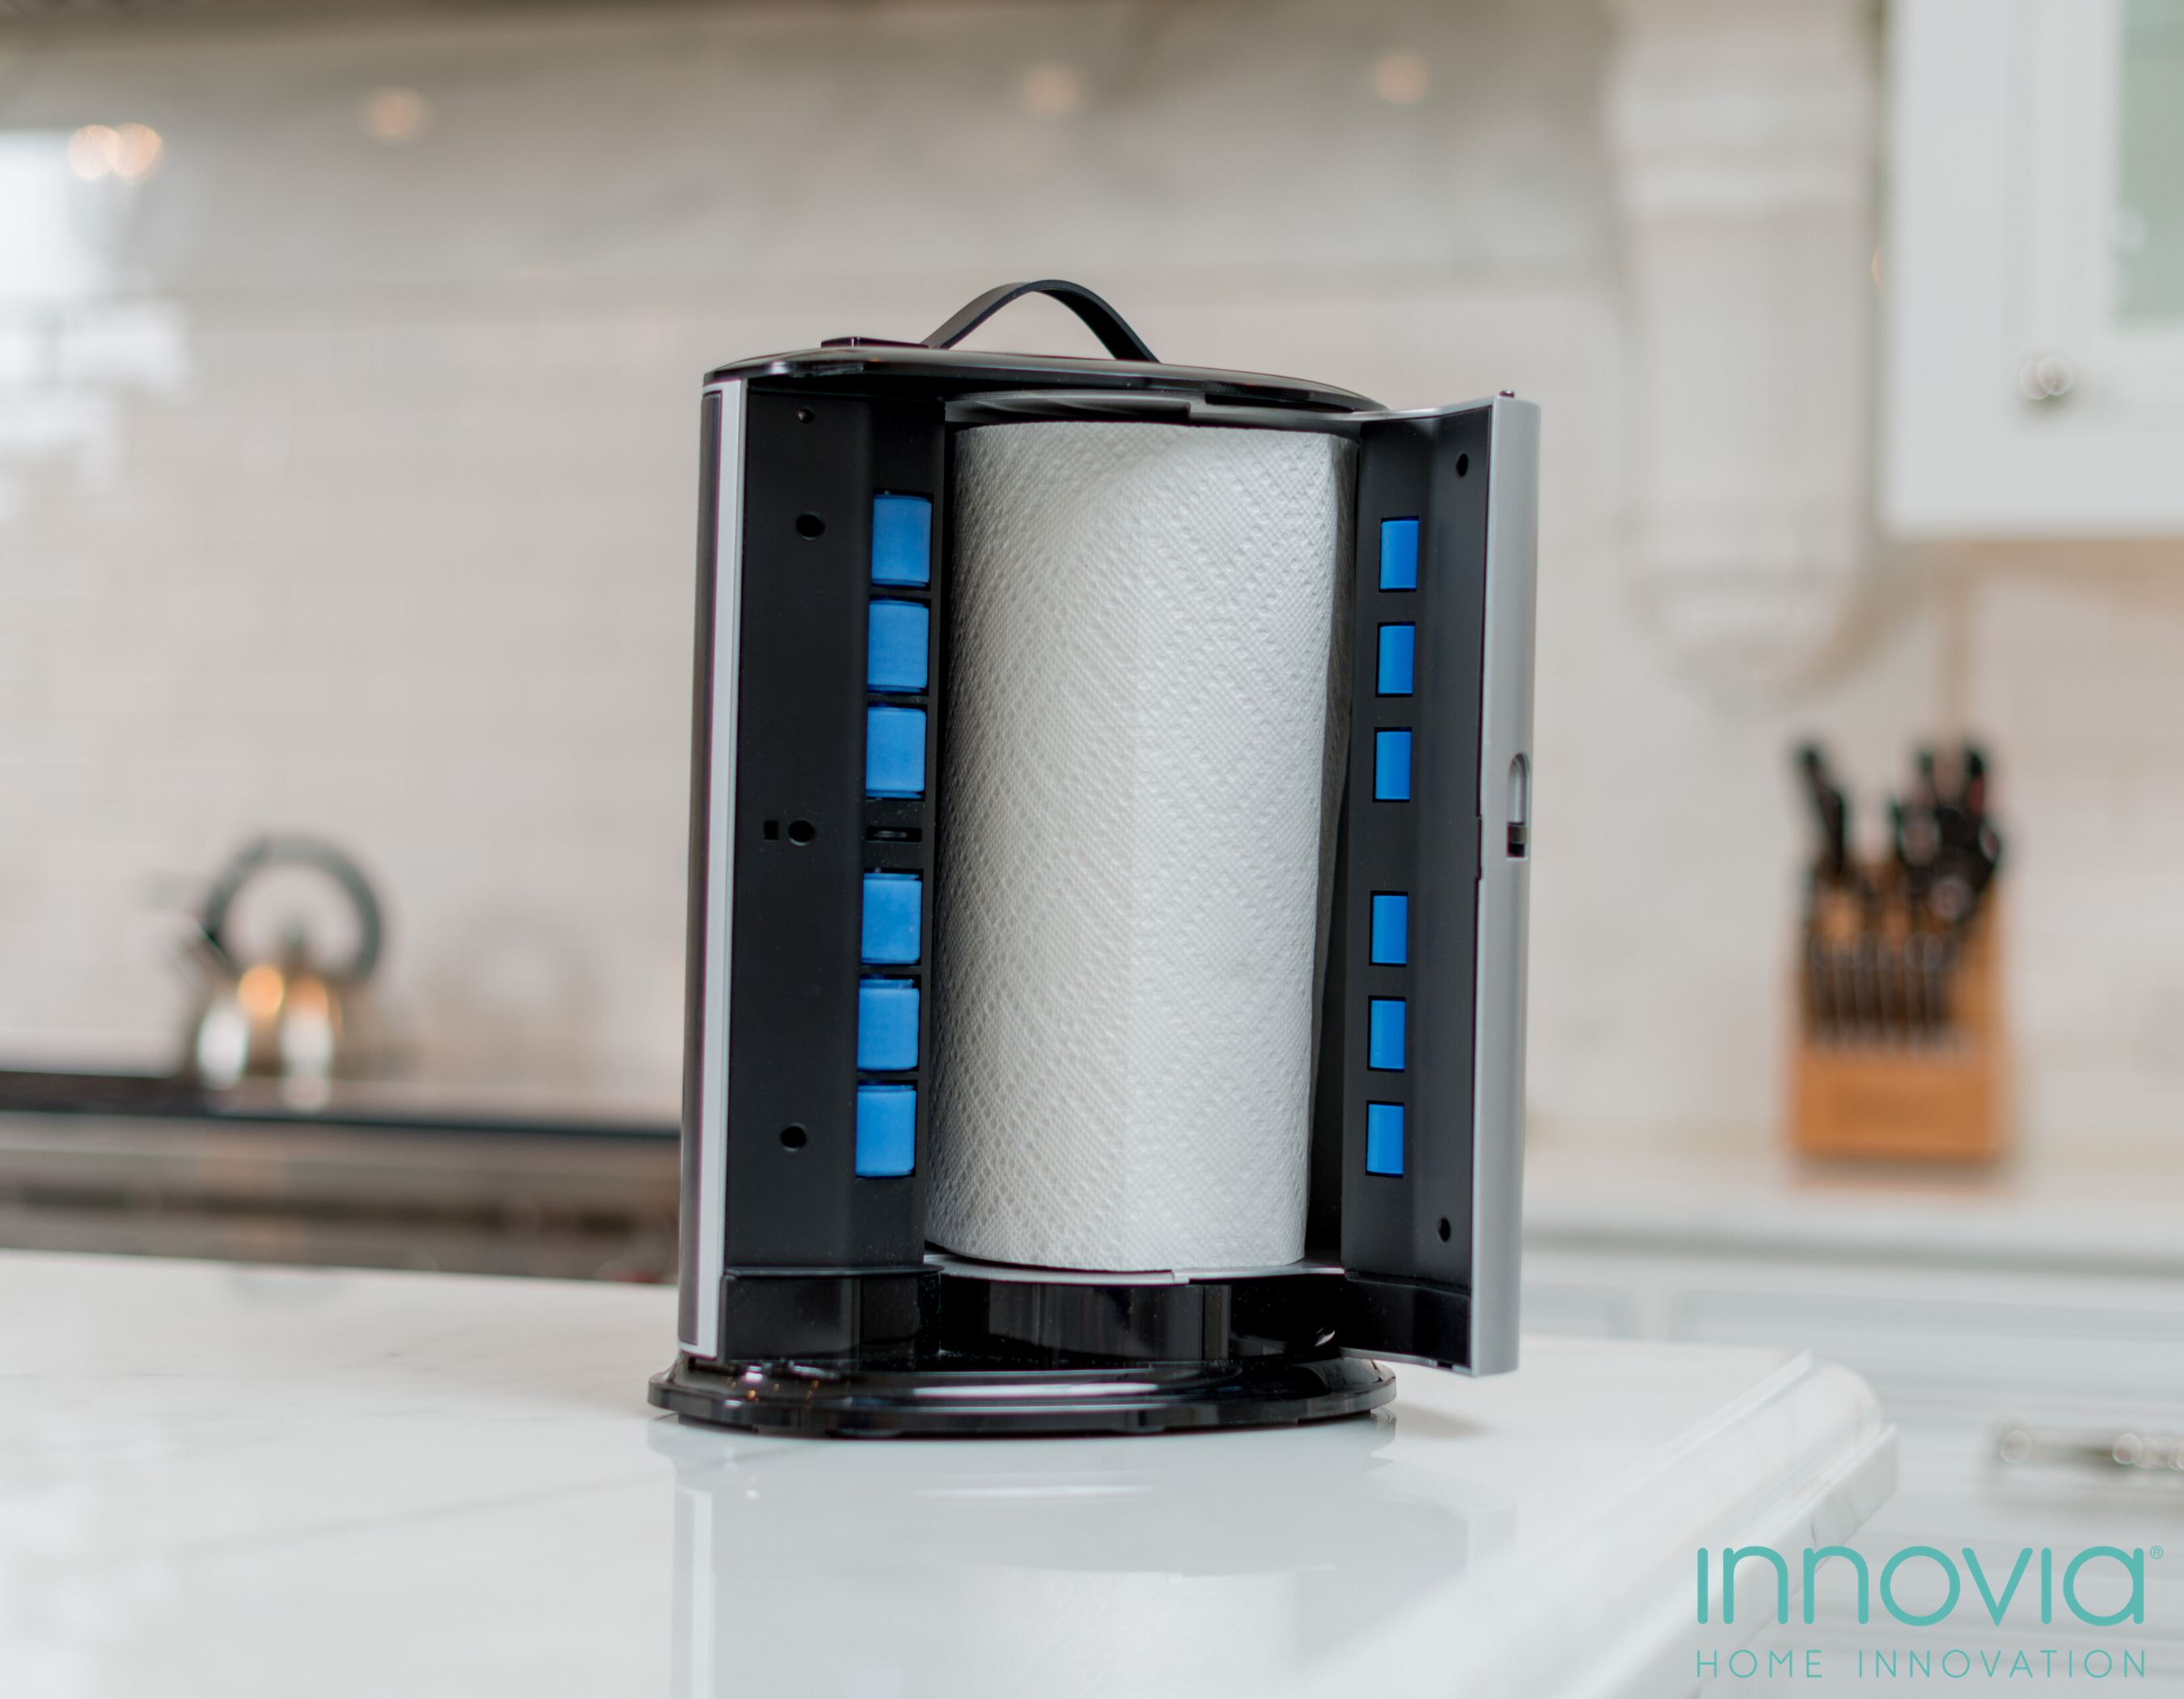 Remove it from the box, insert your favorite brand of paper towel, and the Innovia® Paper Towel Dispenser is ready to use.